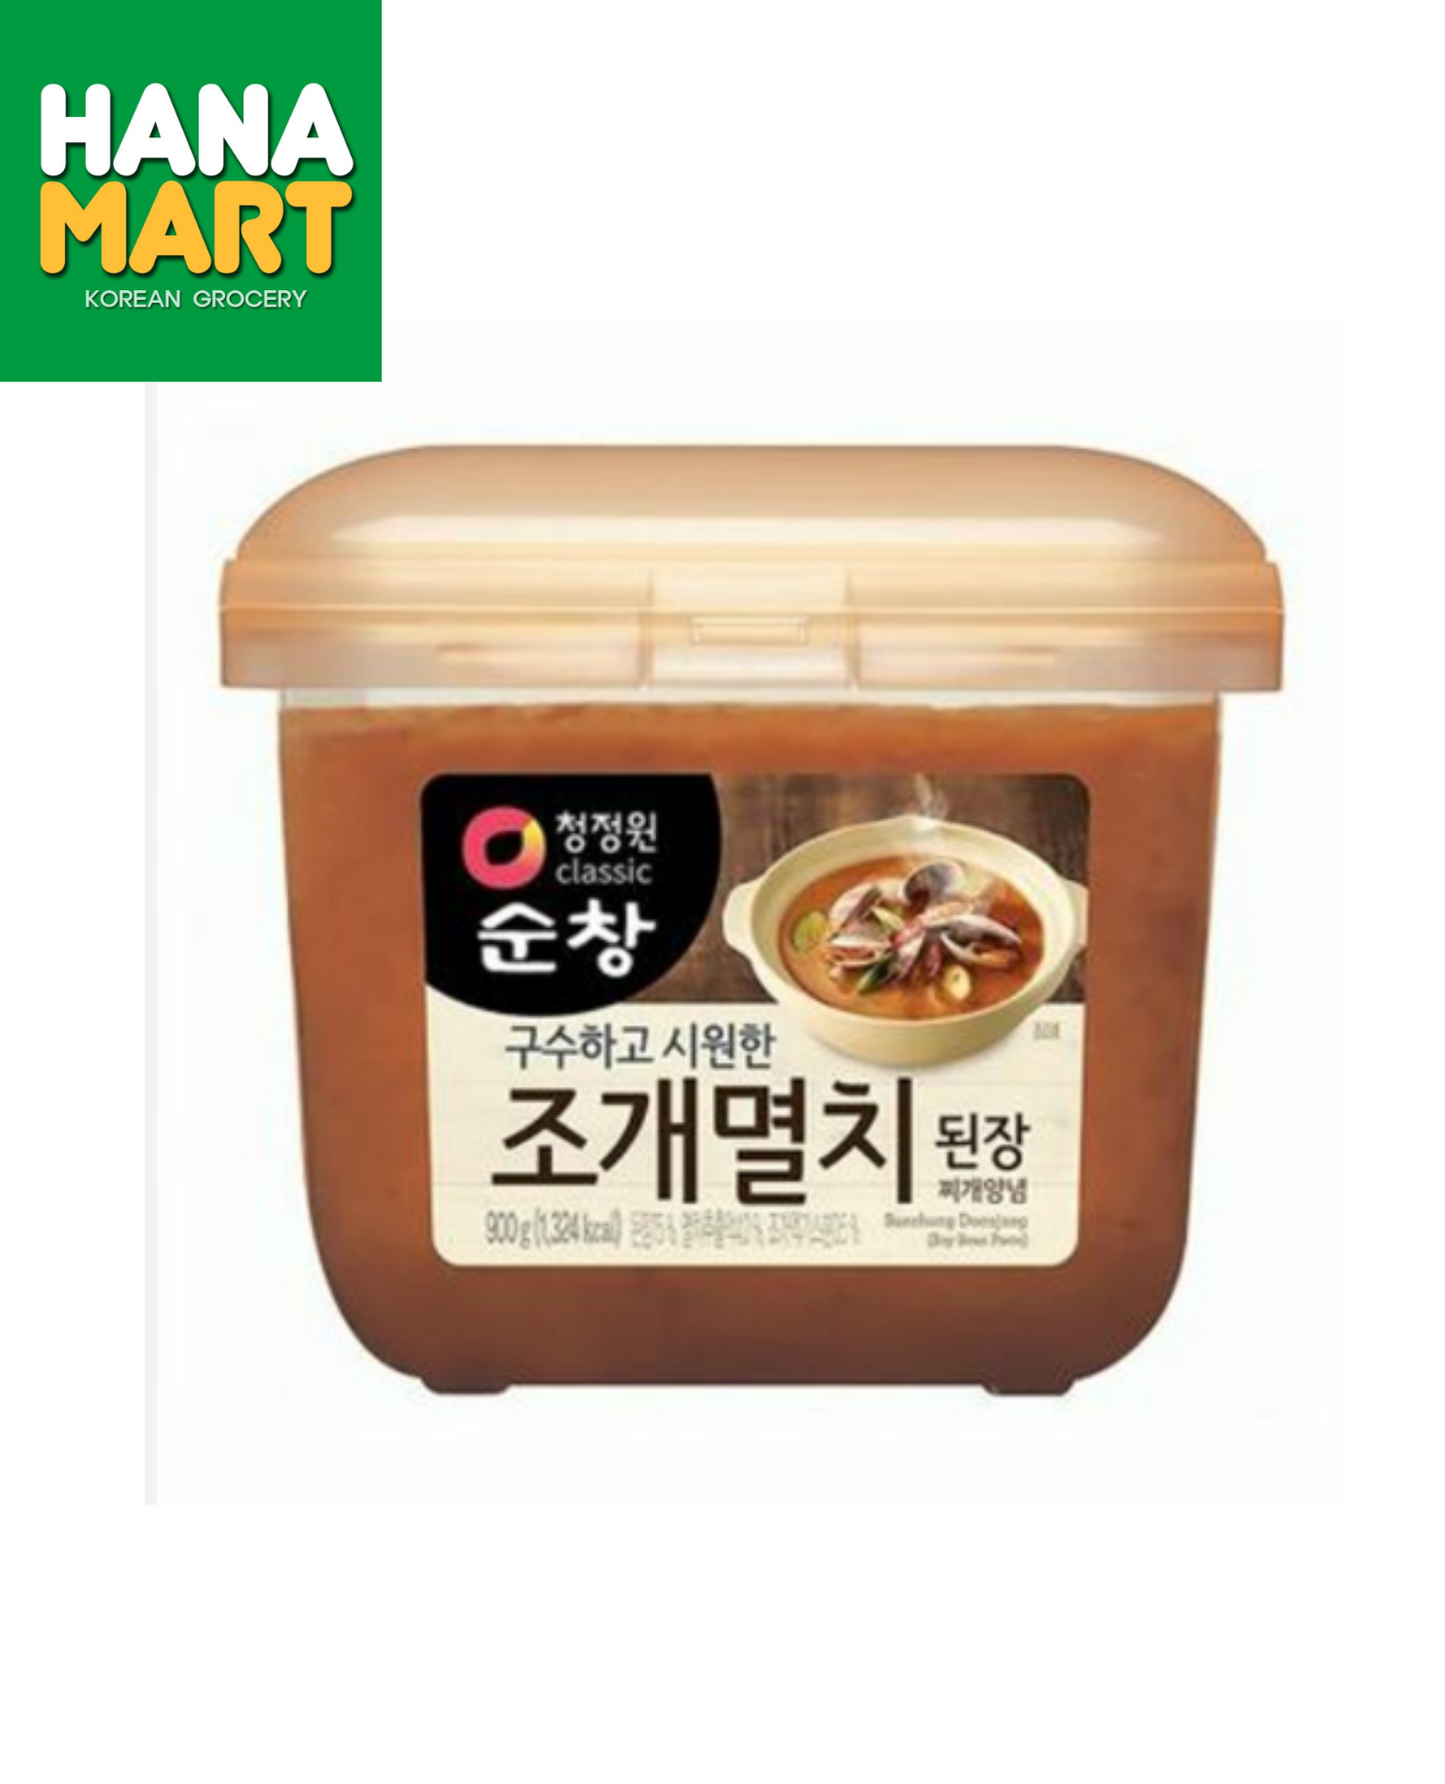 Shellfish & Anchovy Soybean Paste 900g